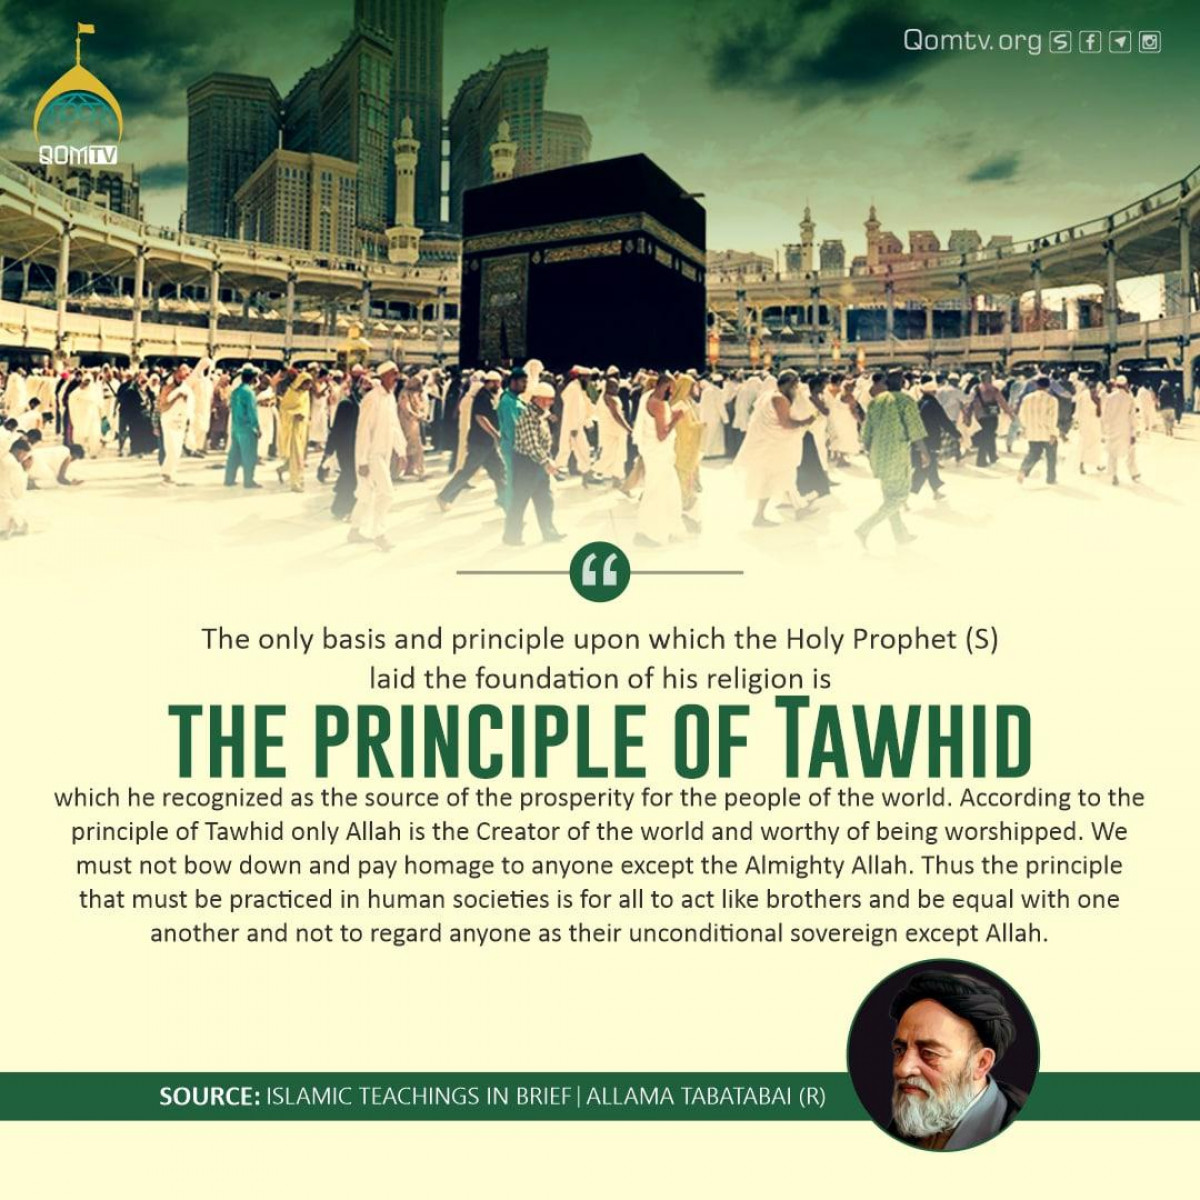 The only basis and principle upon which the Holy Prophet (S) laid the foundation of his religion is the principle of Tawhid